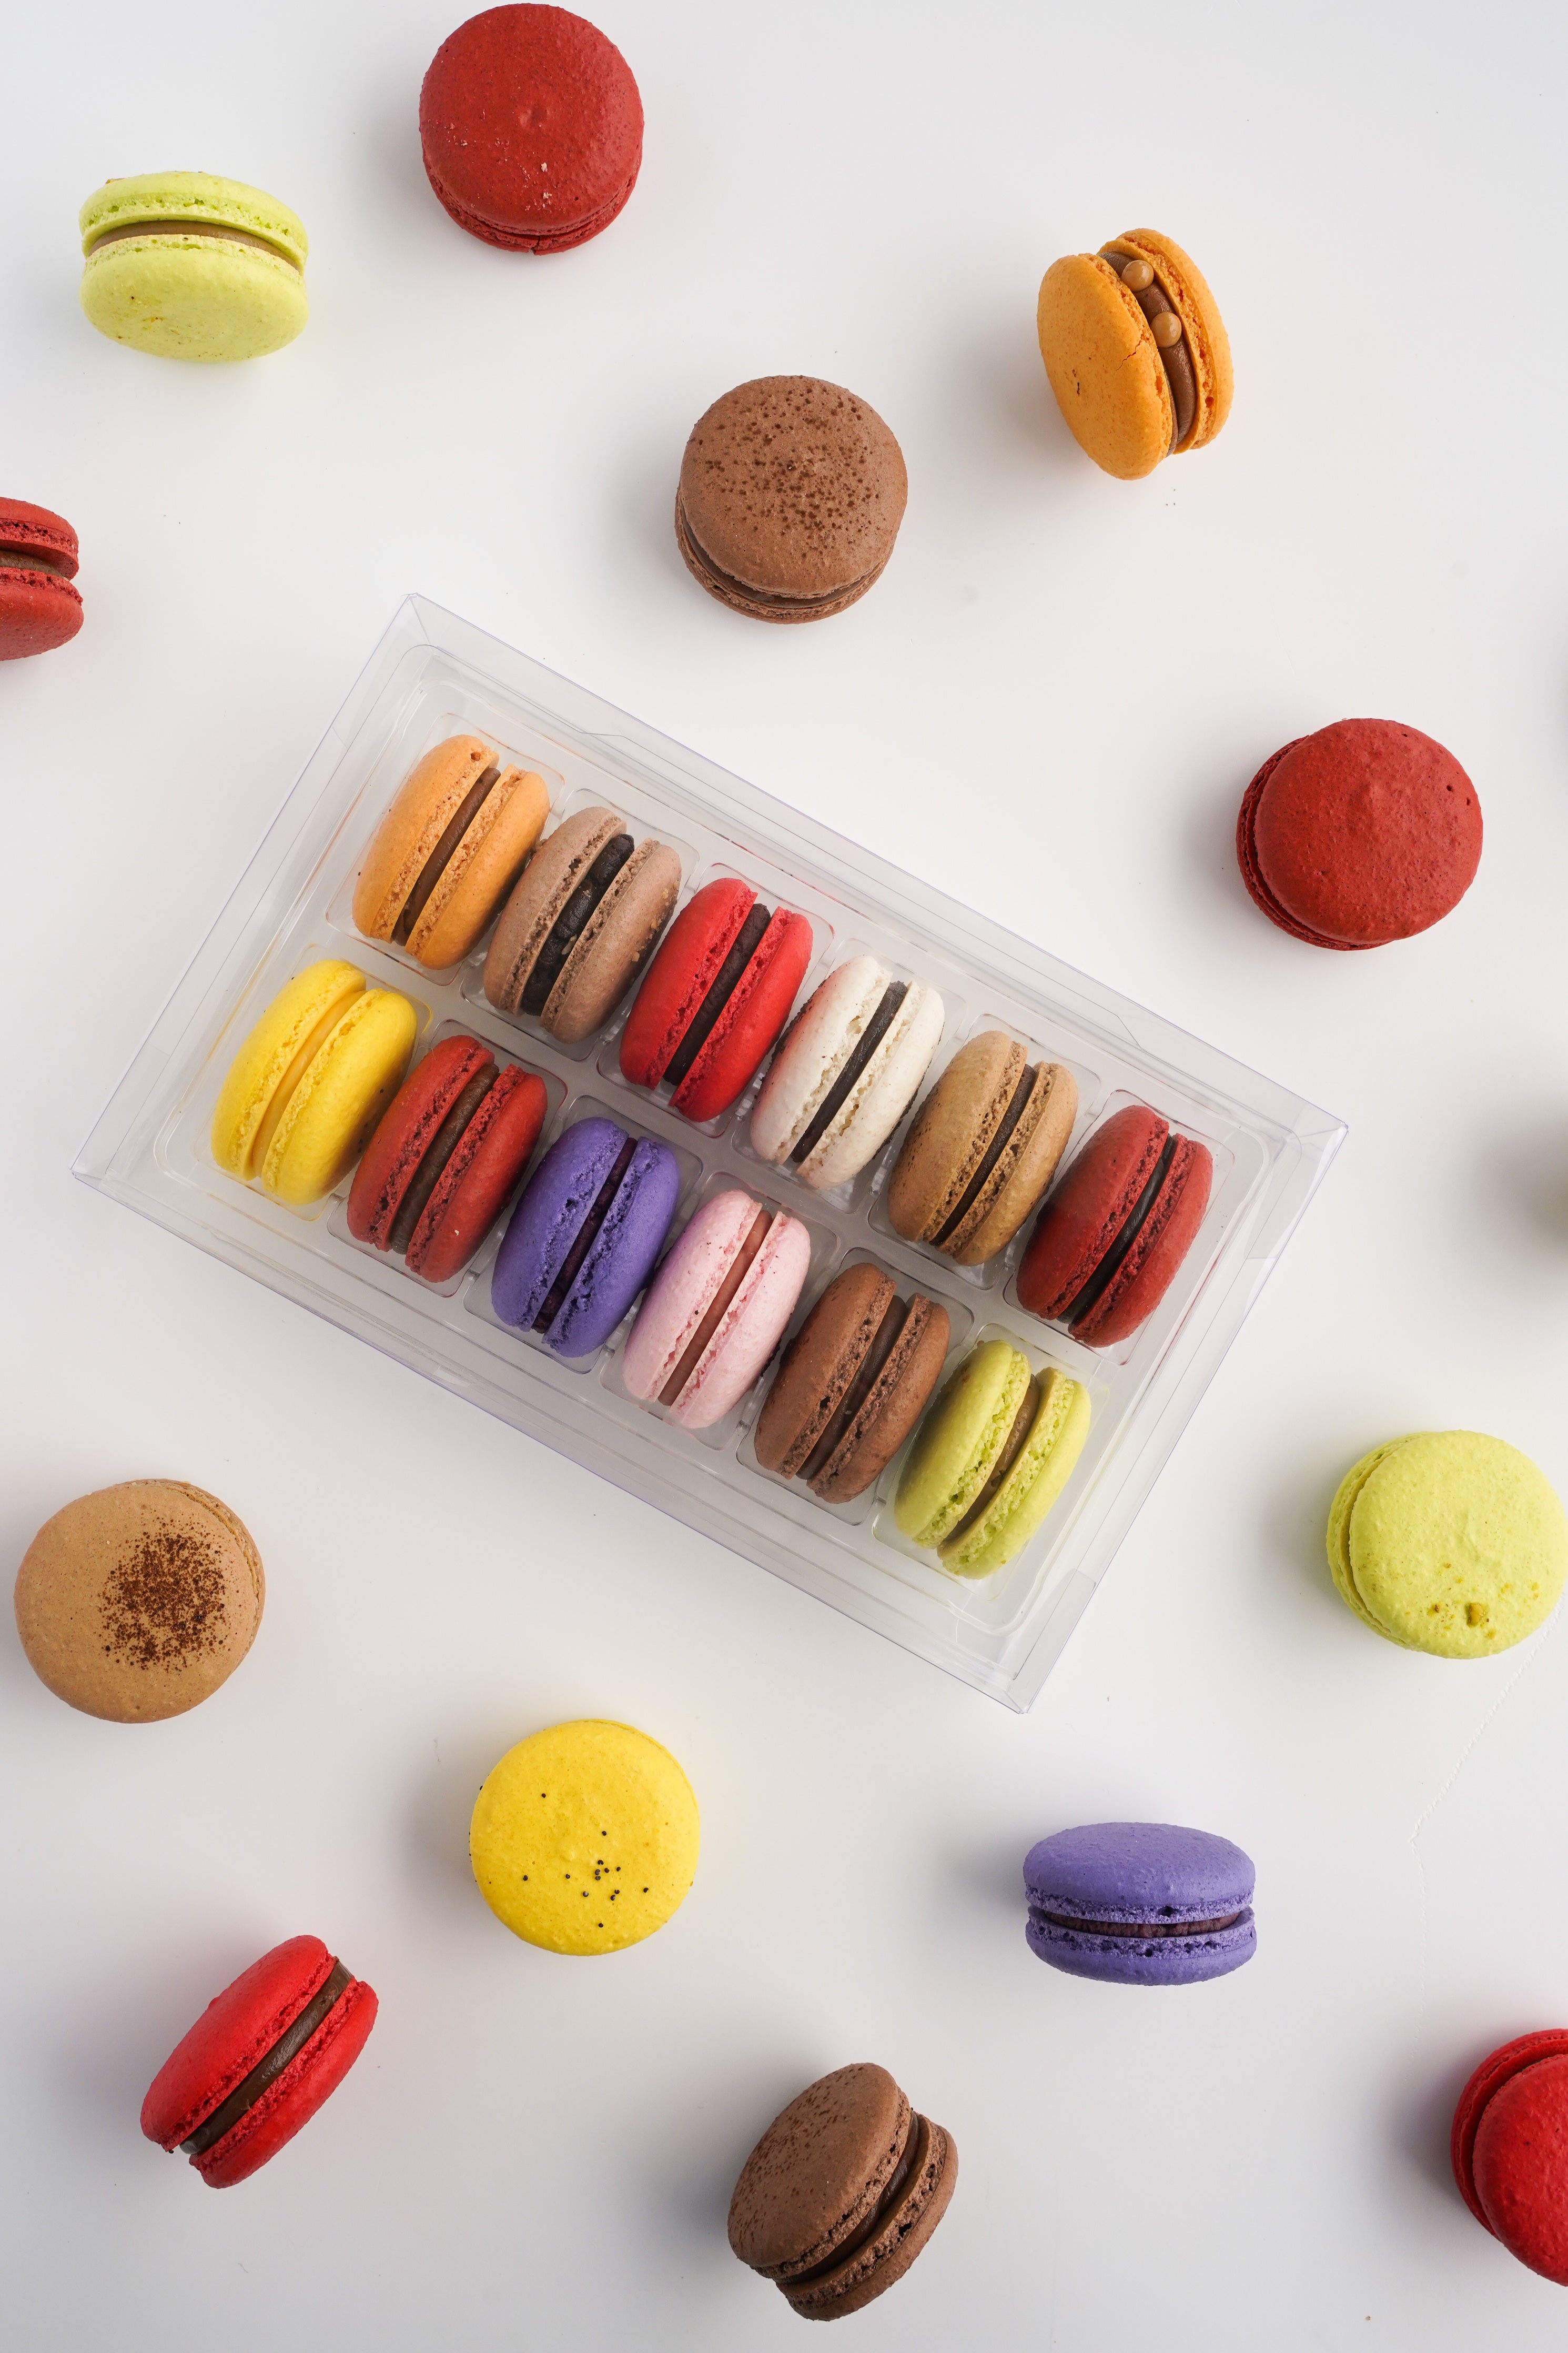 Assorted variety of macarons